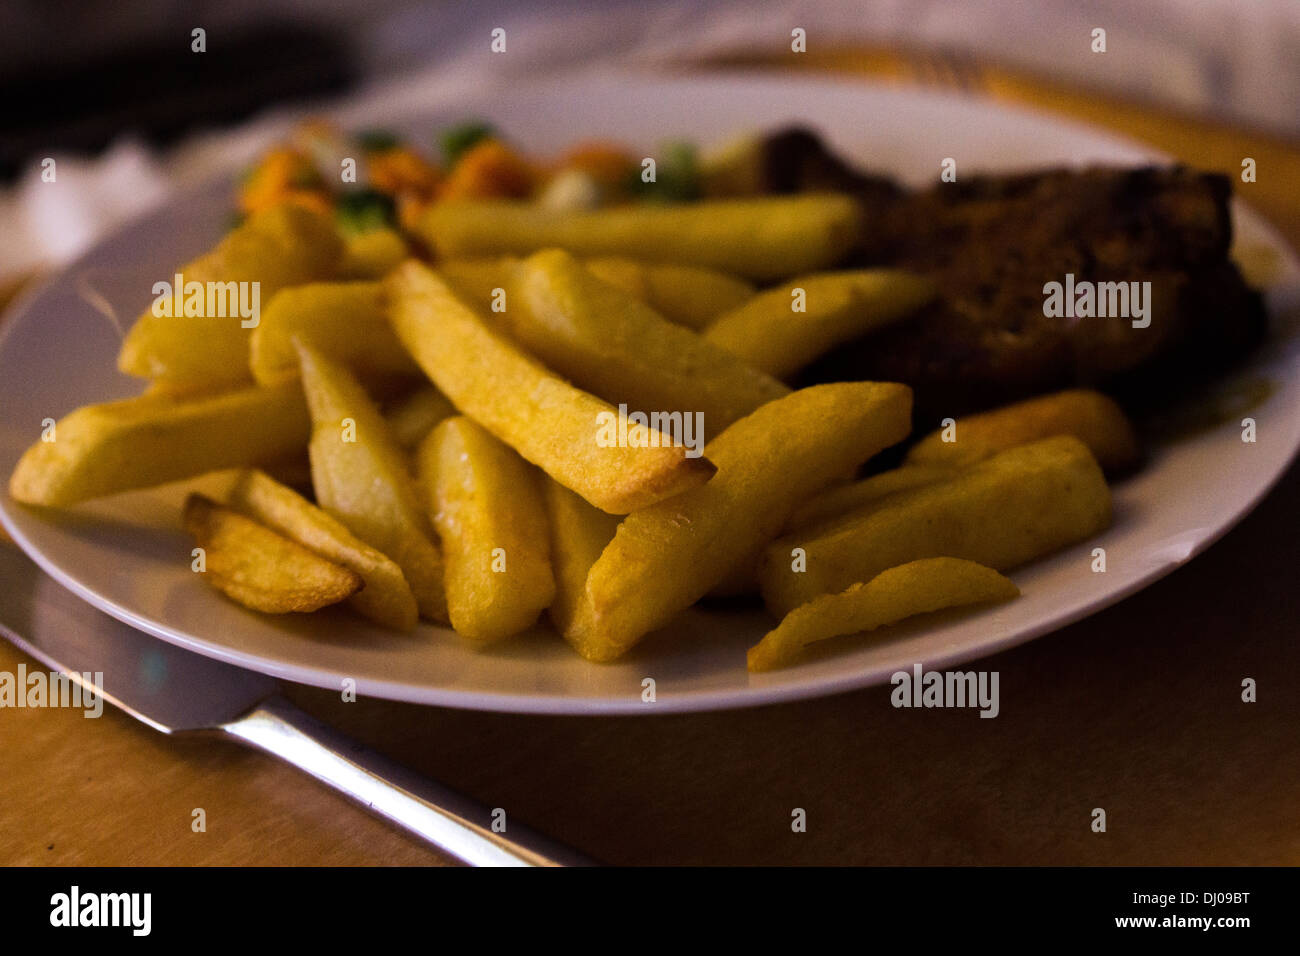 fresh food well done meat gravy fries chips plate Stock Photo